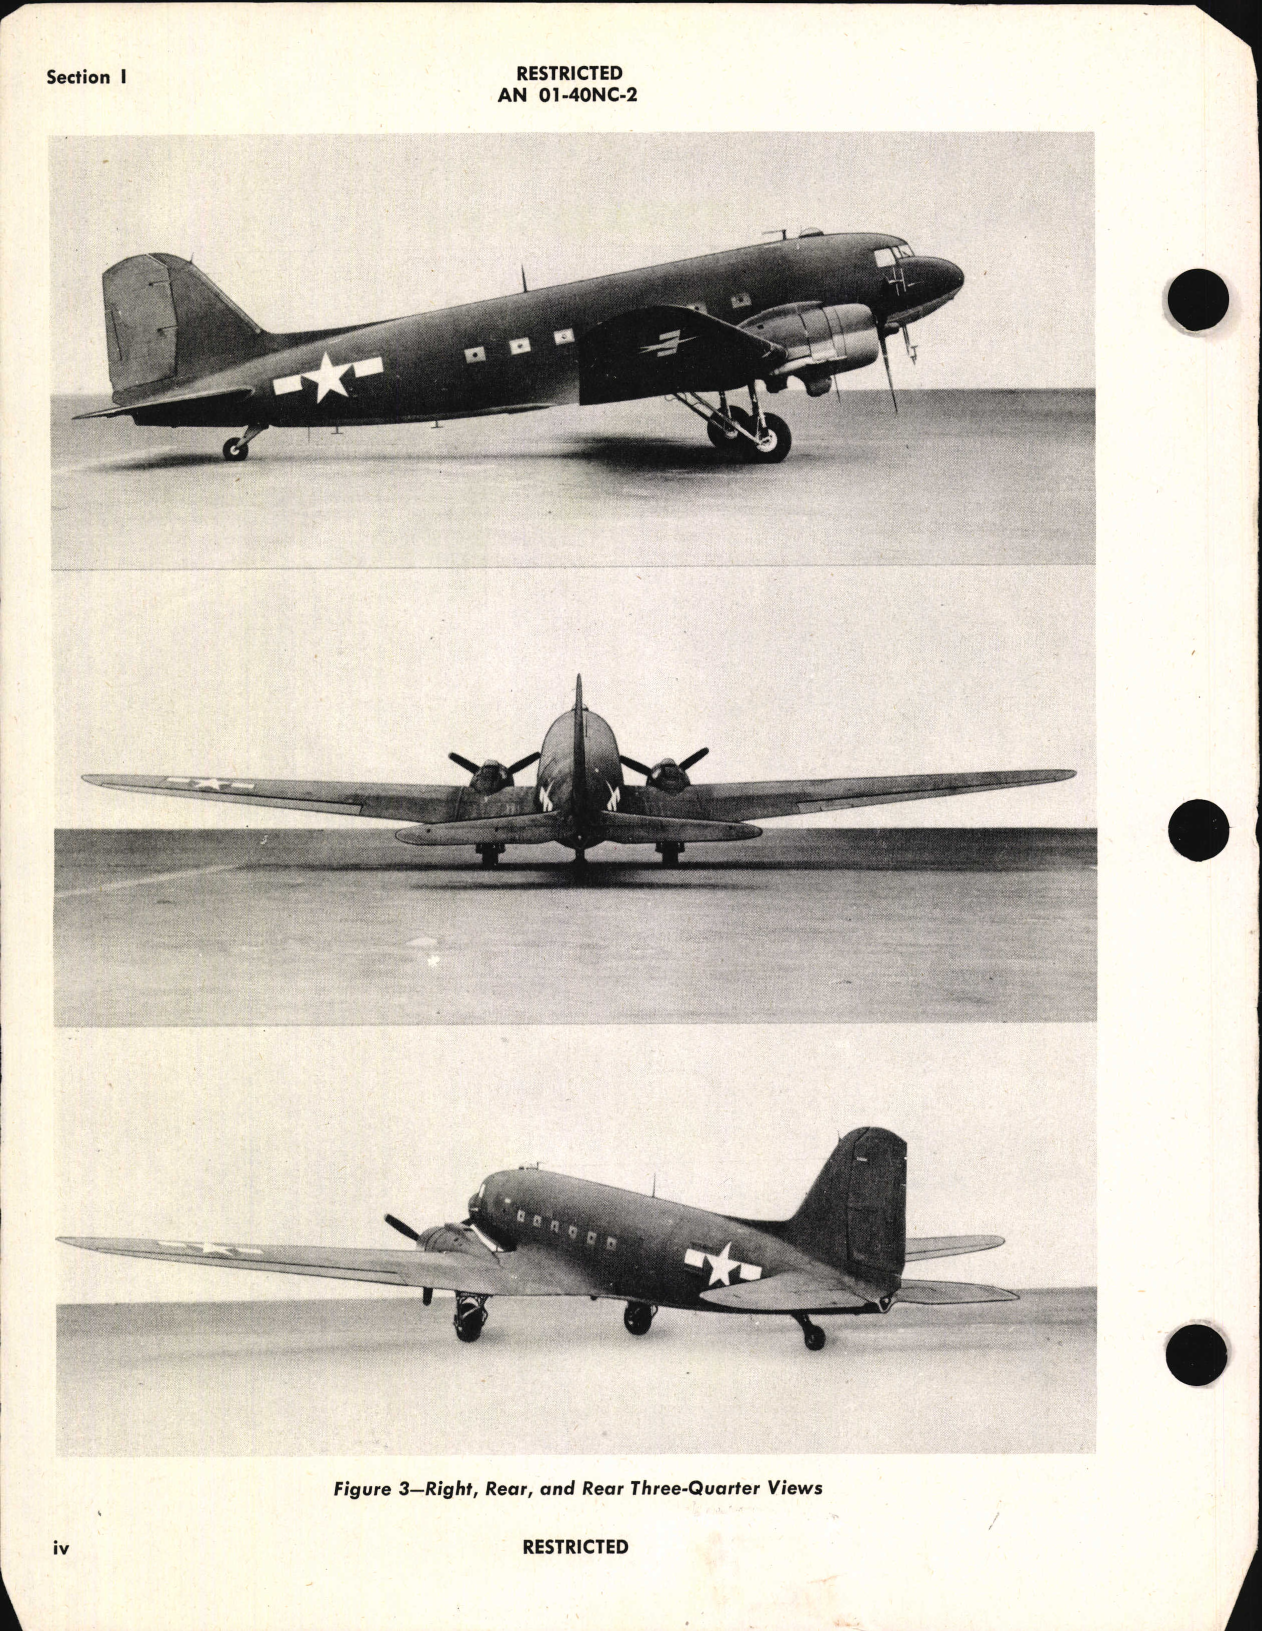 Sample page 6 from AirCorps Library document: Erection and Maintenance Instructions for C-47, C-47A, R4D-1, and R4D-5